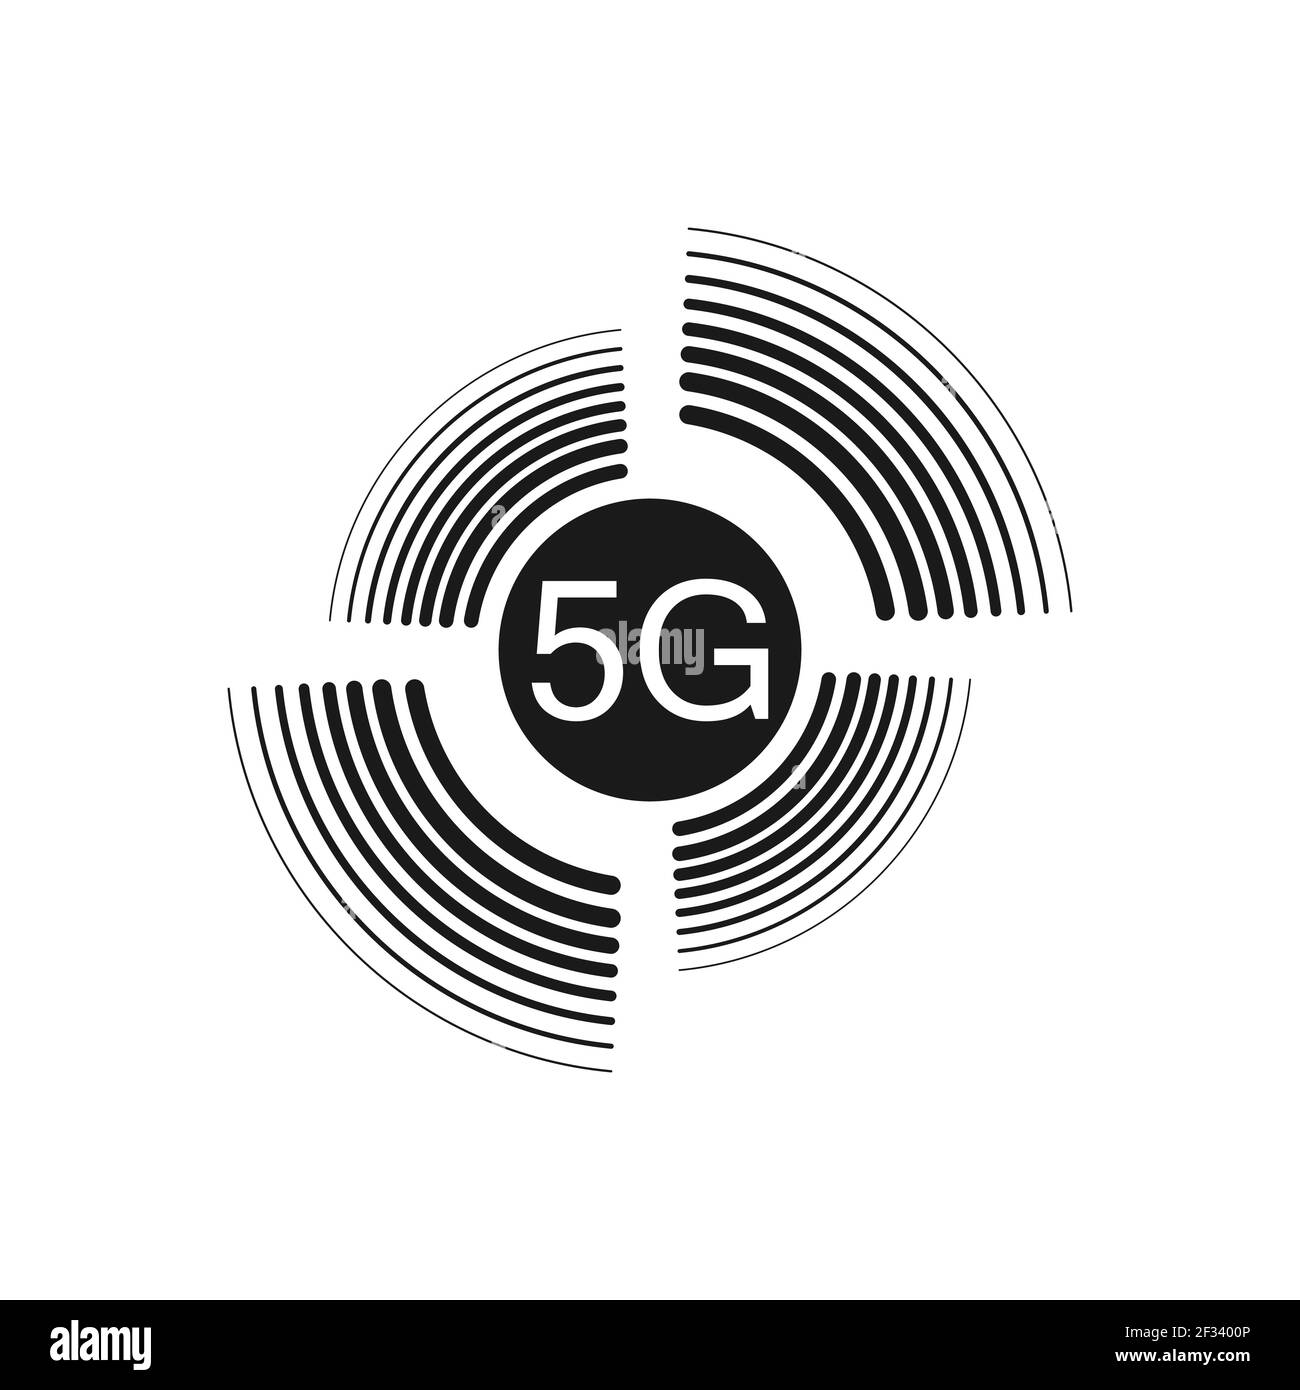 Vector icon of 5G technology. A new generation mobile network. Stock Vector